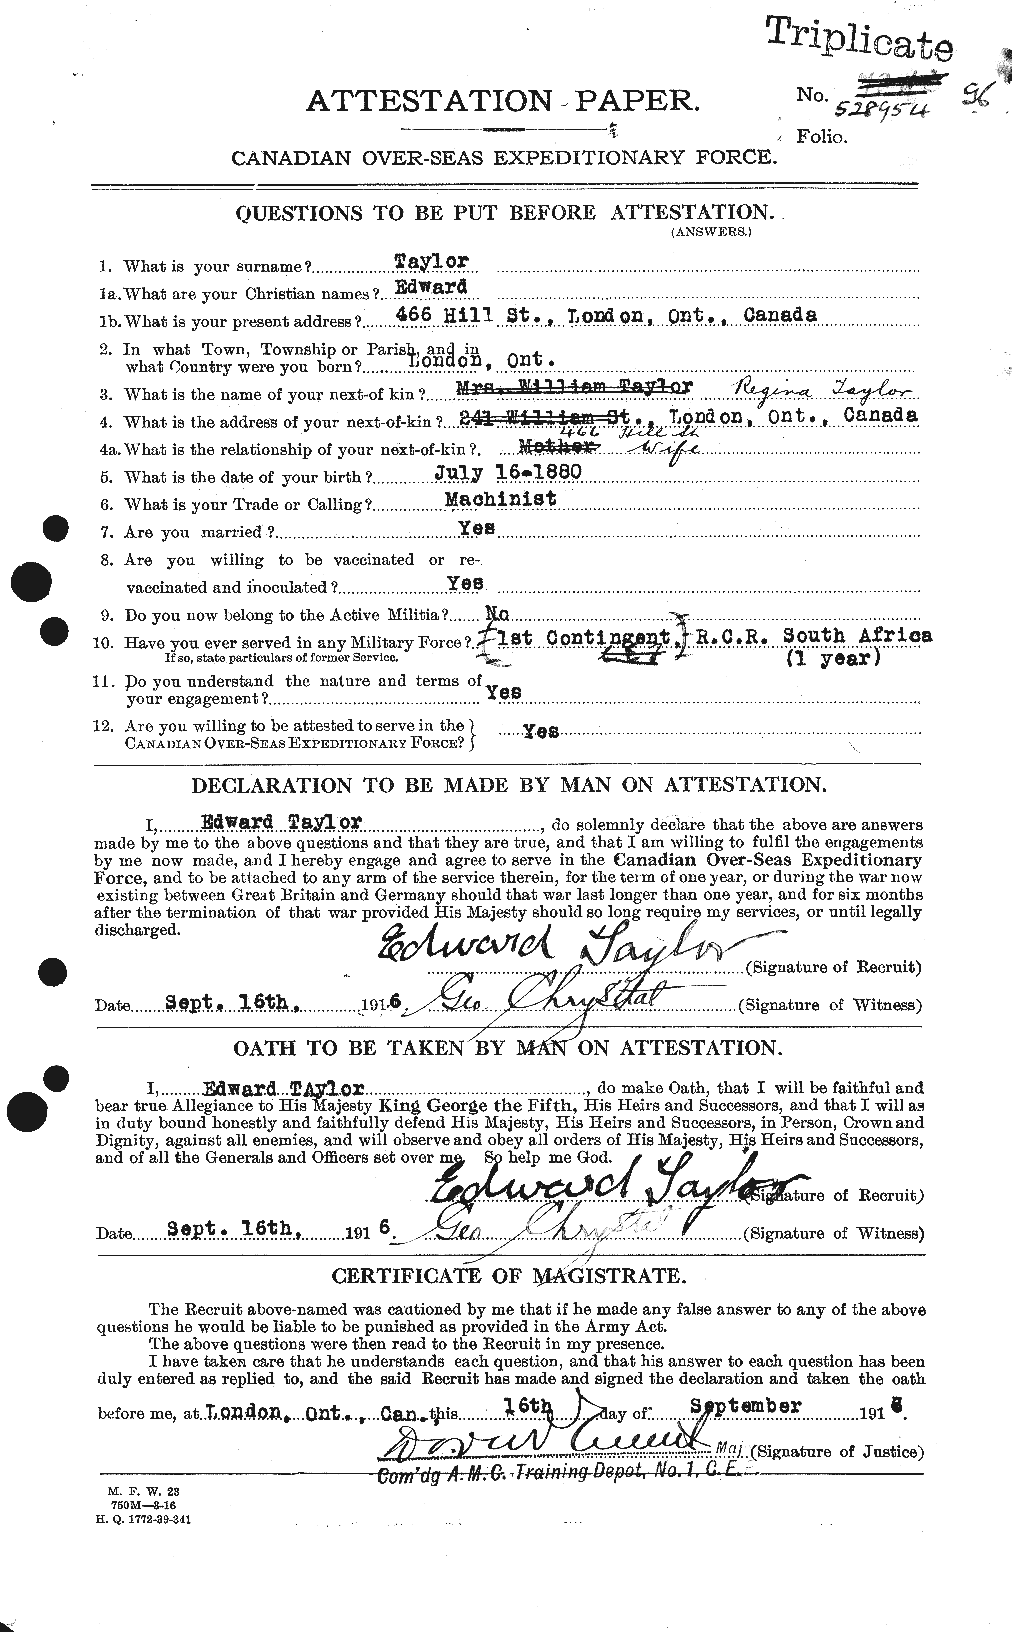 Personnel Records of the First World War - CEF 627288a